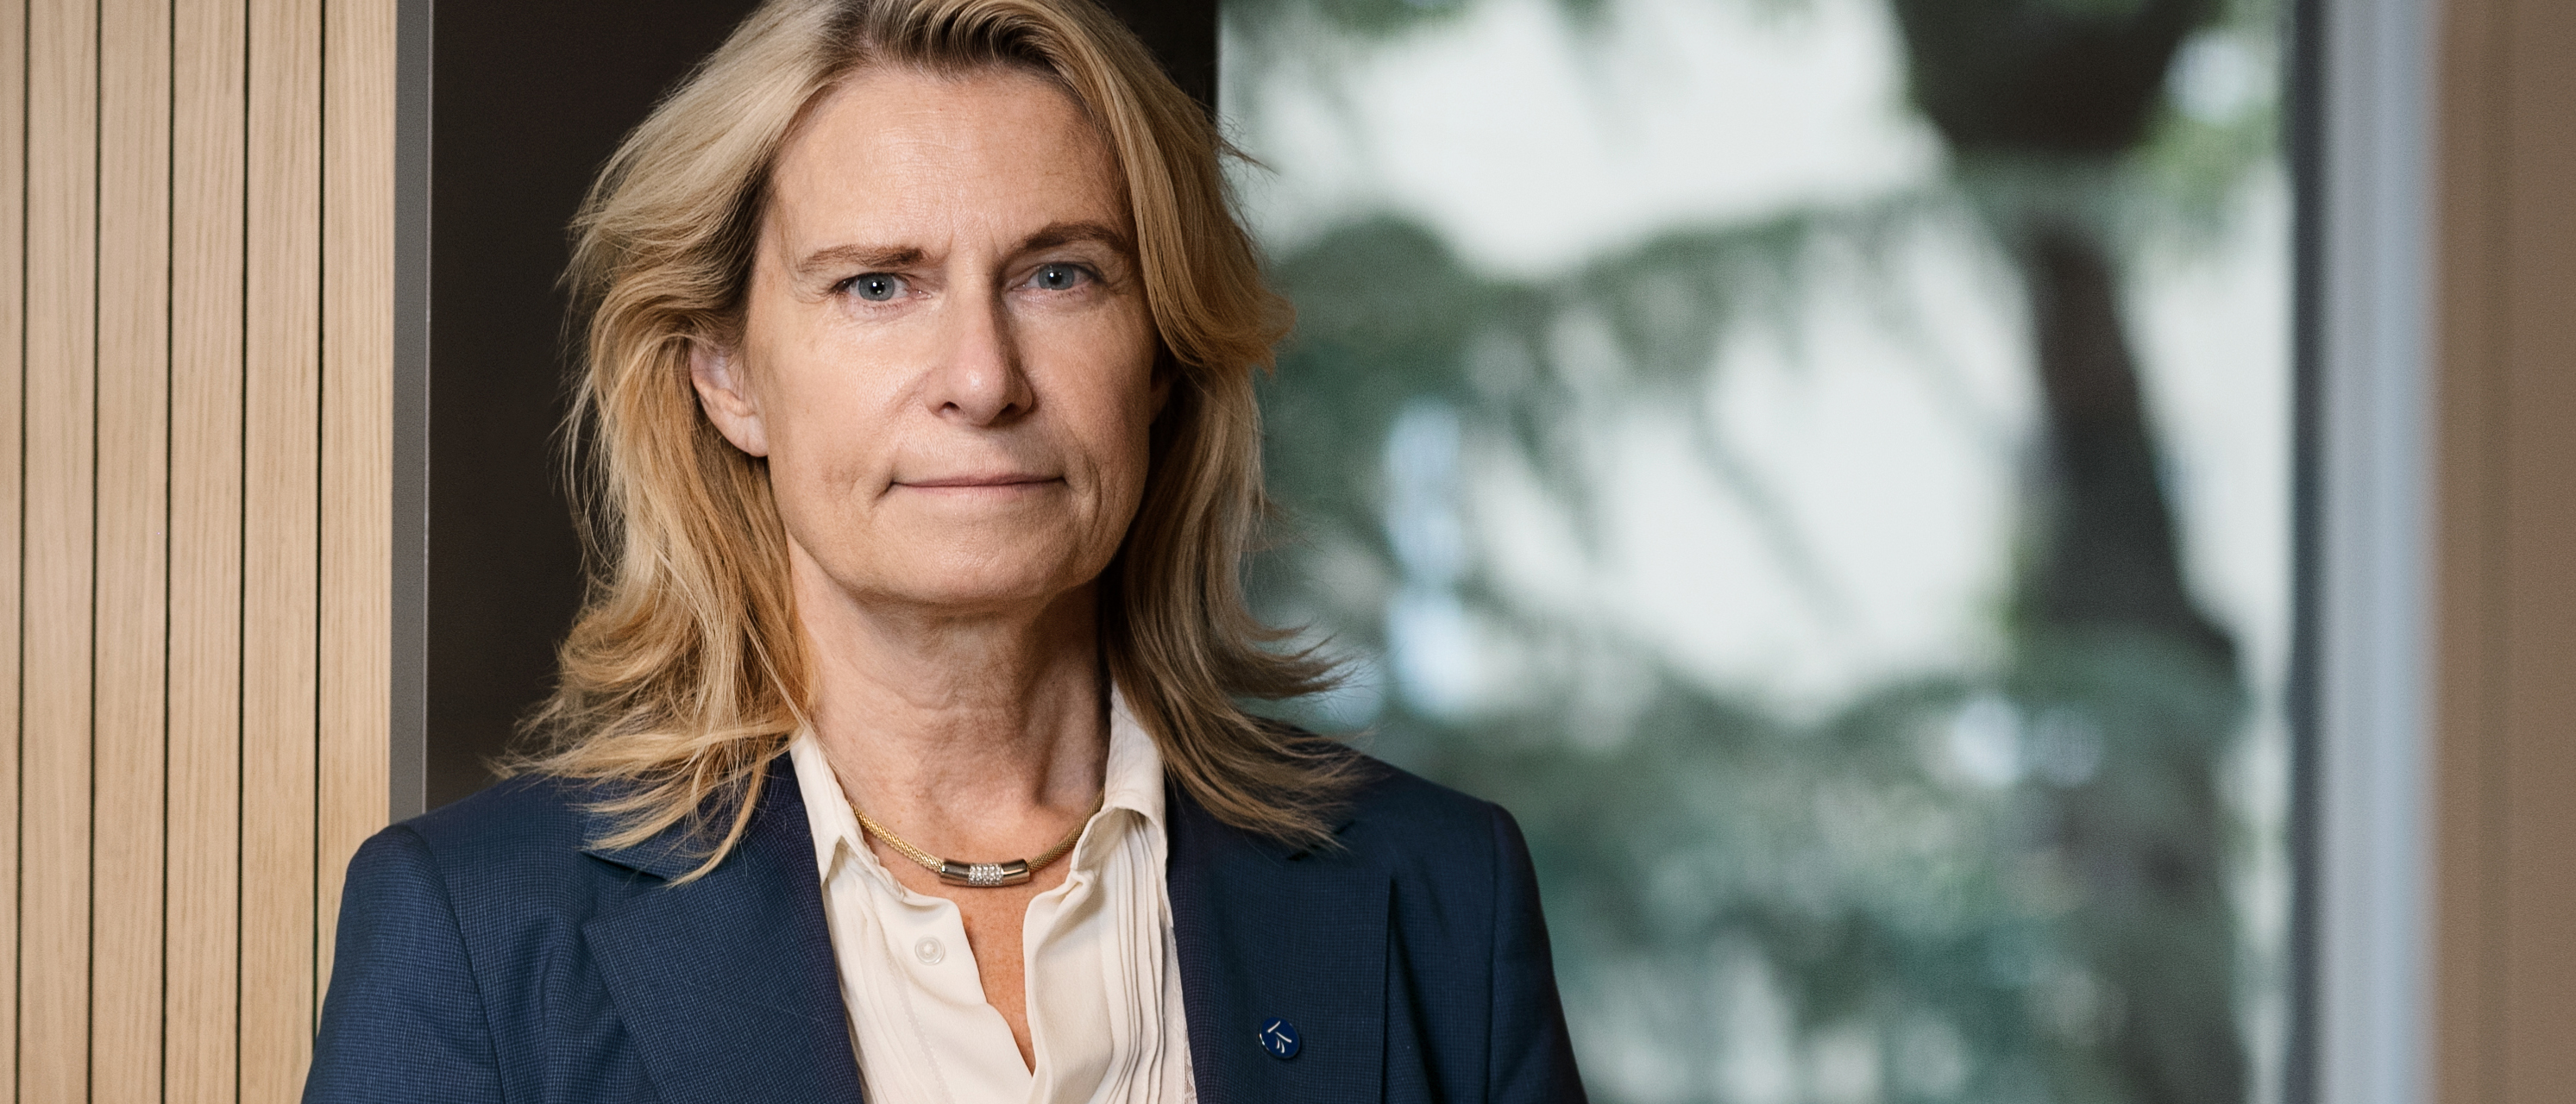 Photo of Katarina Bjelke, Director General of the Swedish Research Council.